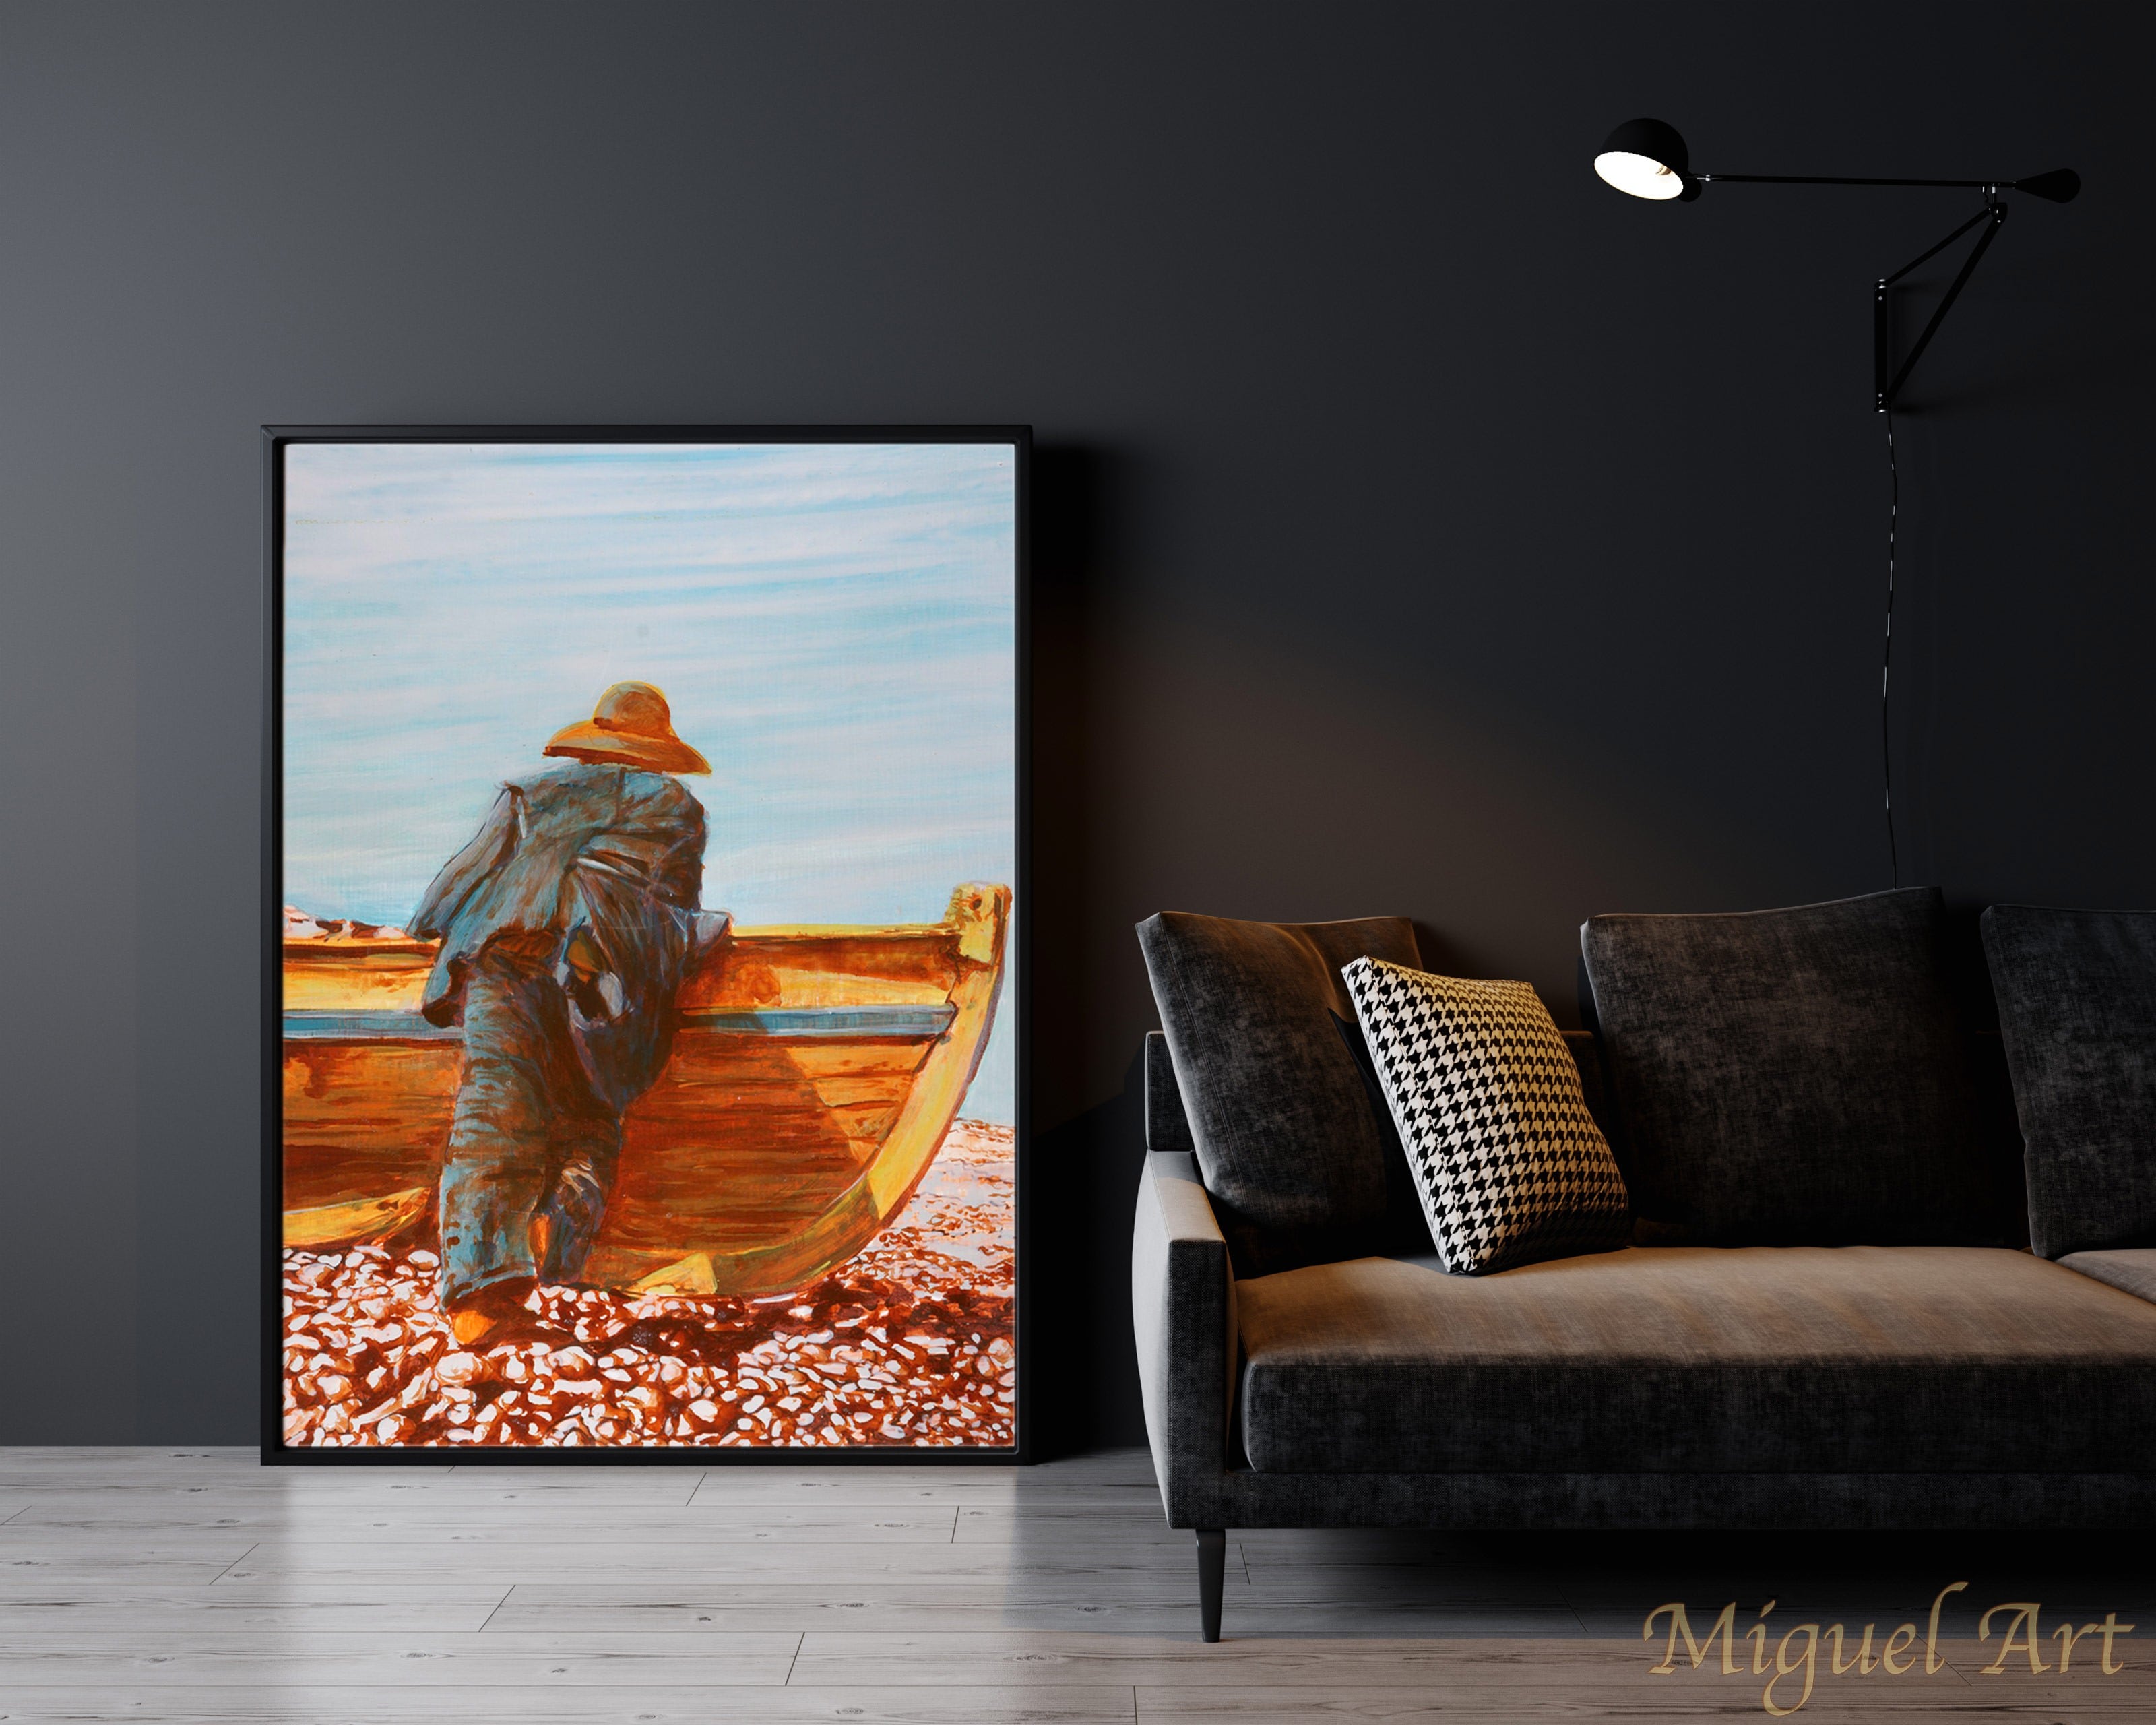 Painting of Pescador displayed leaning against the wall on the floor next to a black couch